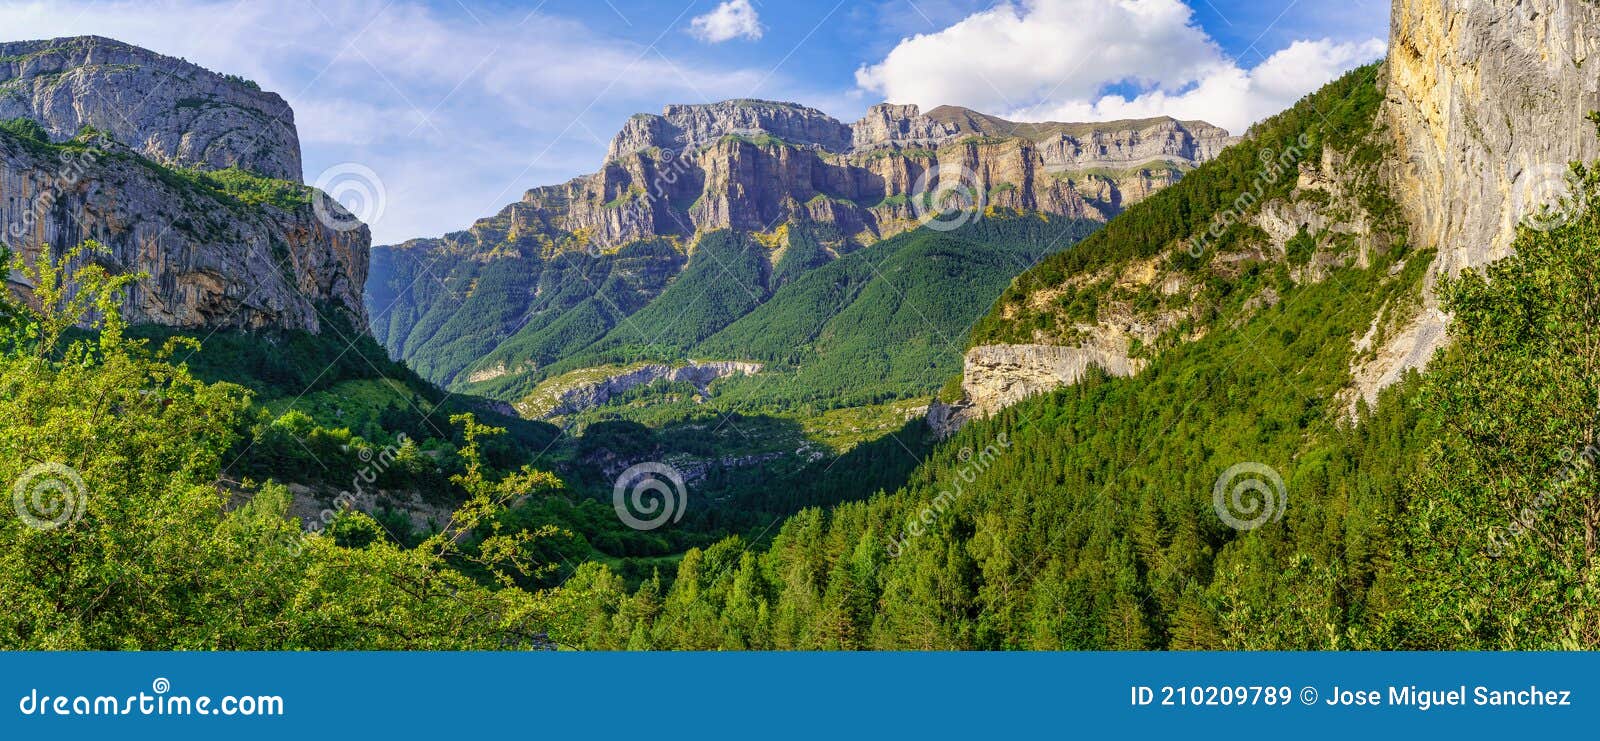 panoramic high rocky mountain landscape with green forests. ordesa pirineos national park. spain